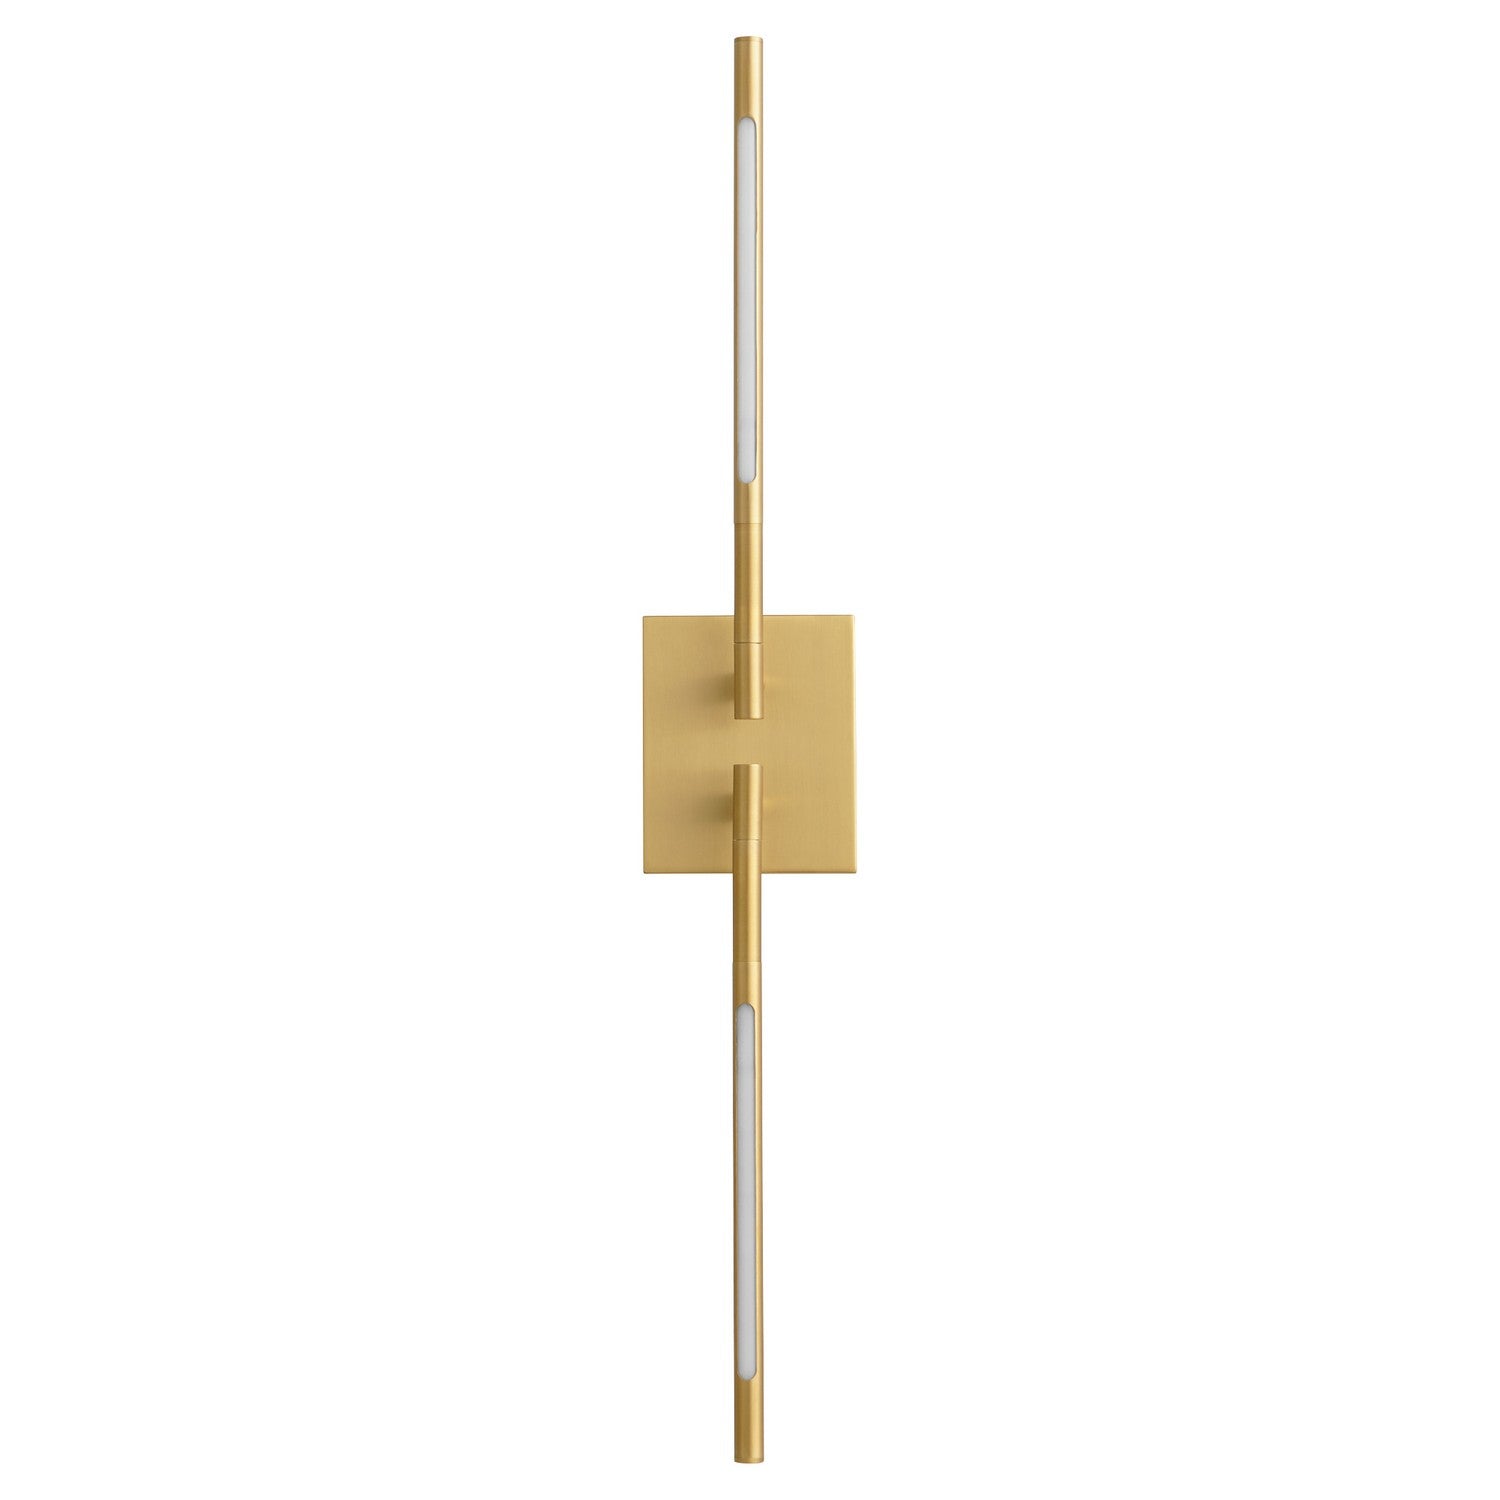 Oxygen Lighting - 3-404-40 - LED Wall Sconce - Palillos - Aged Brass